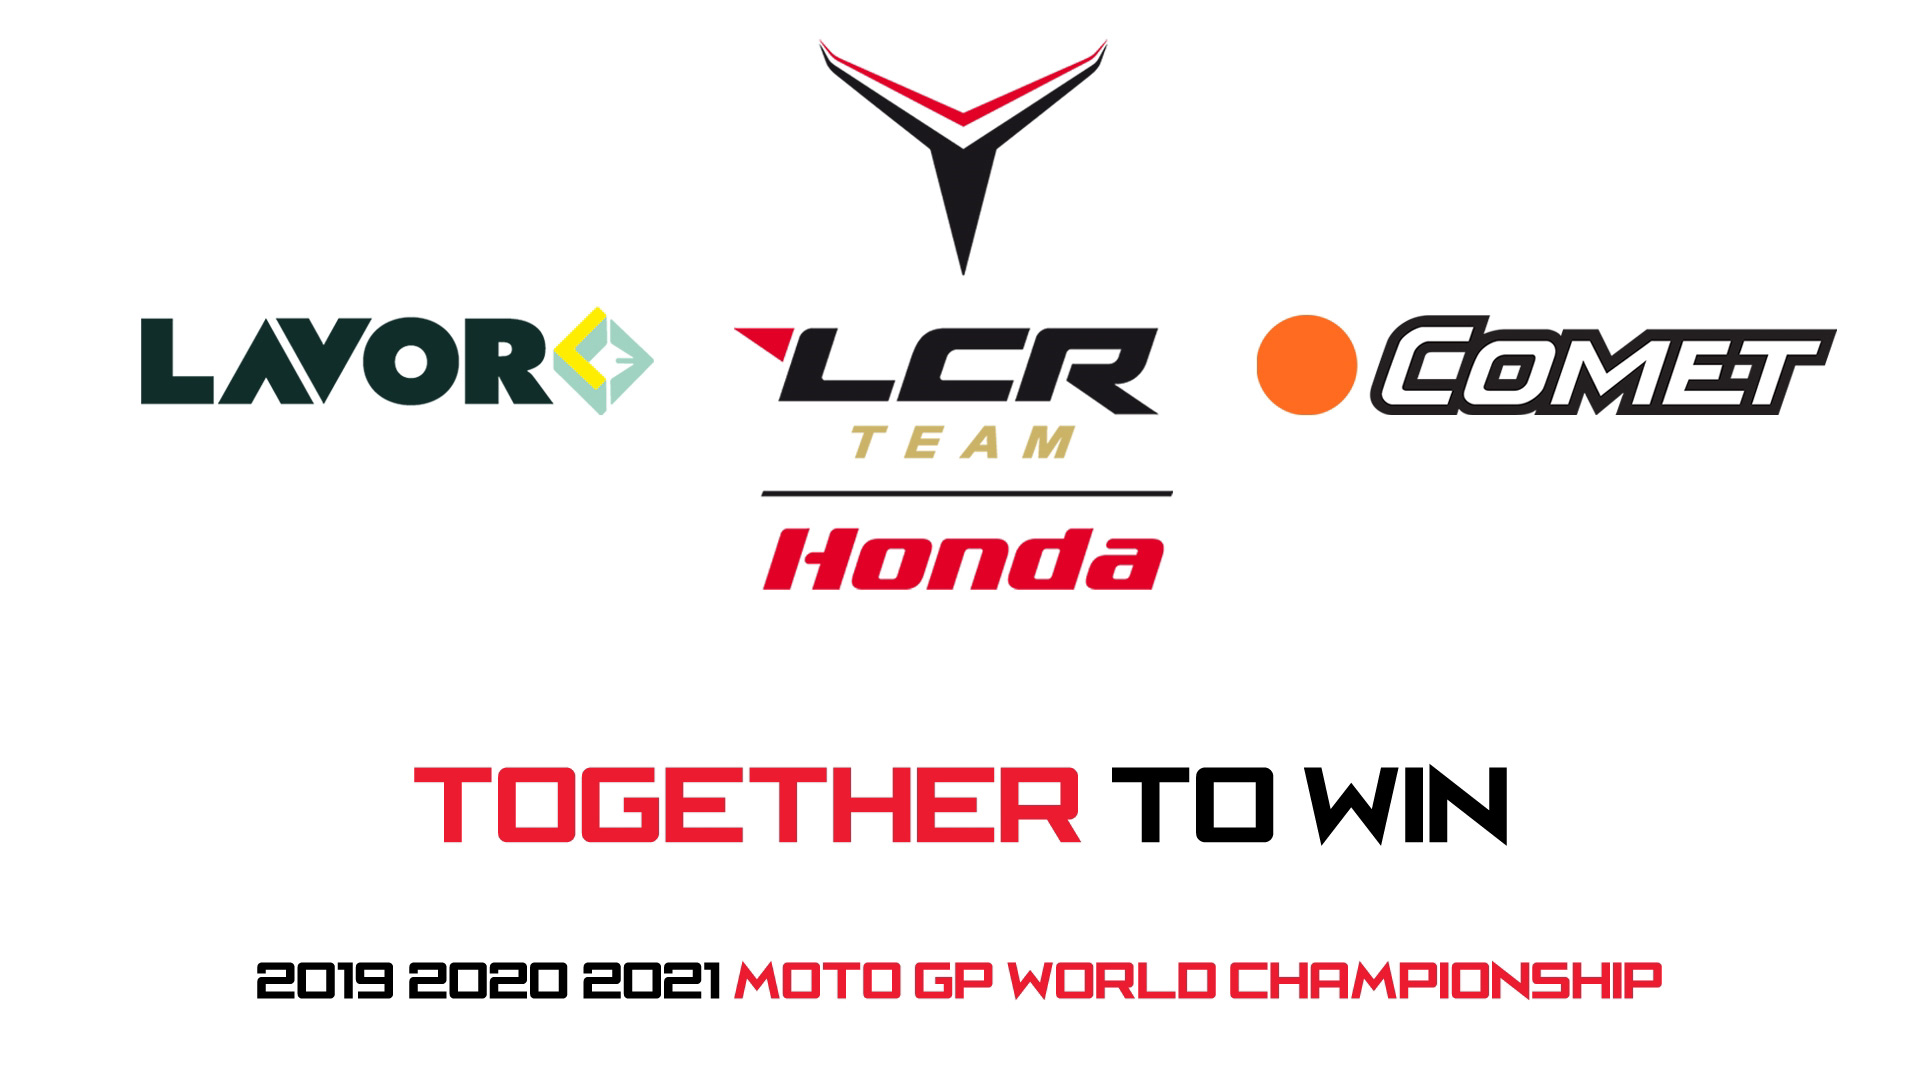 together to win Comet LCR Honda